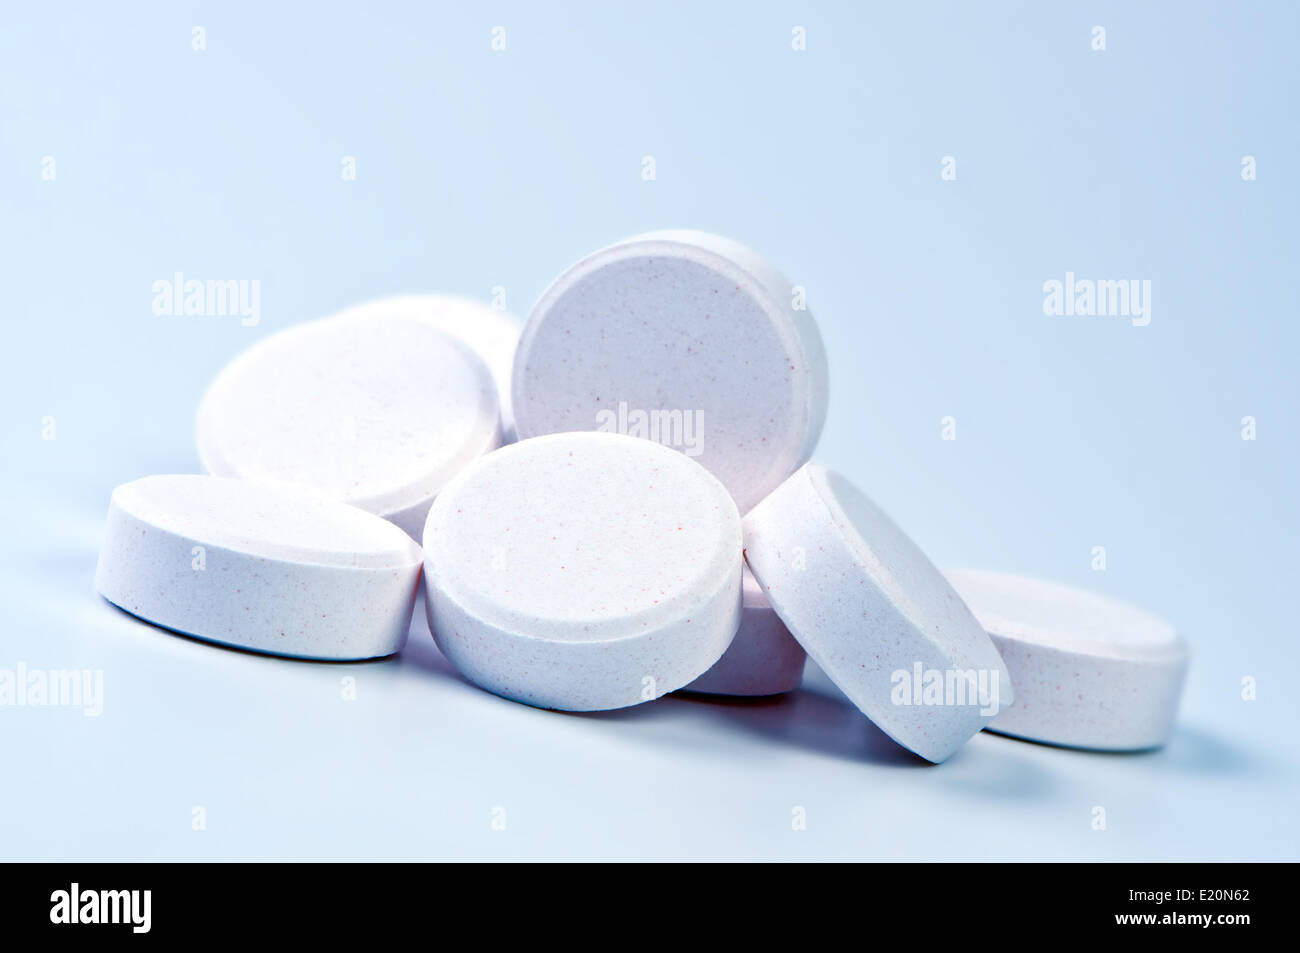 Heap of tablets close up. Stock Photo